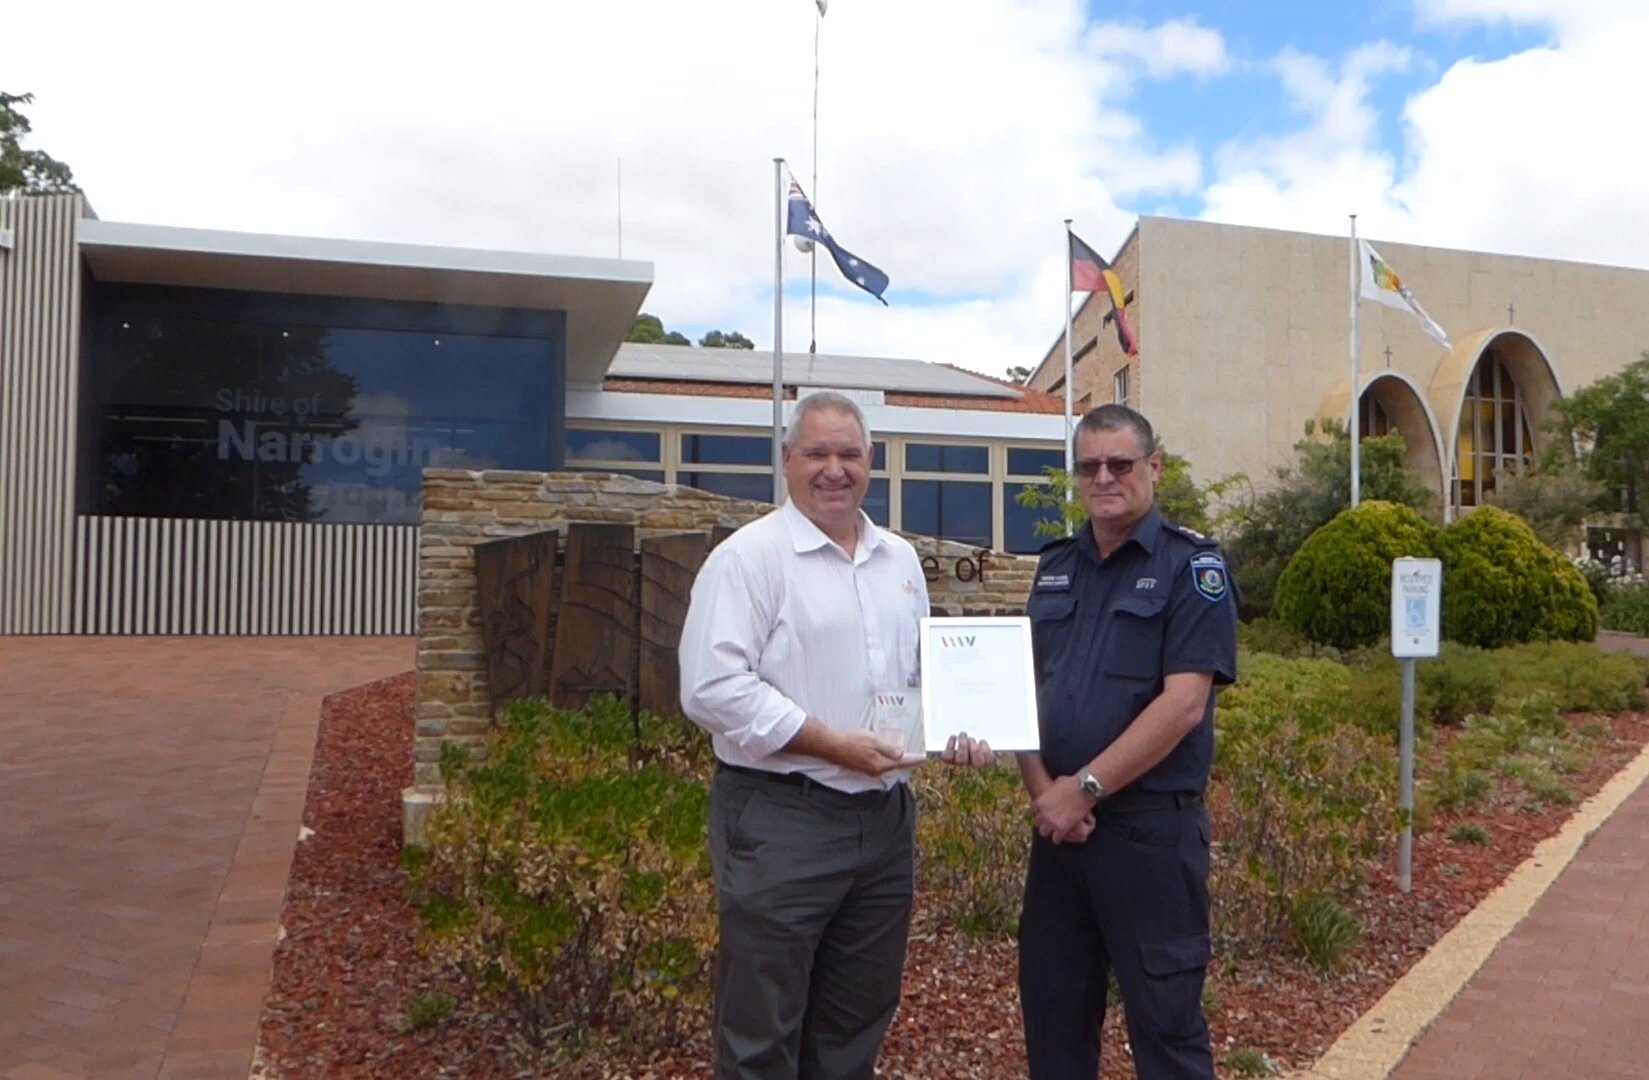 Shire of Narrogin recognised with Volunteer Employer Award